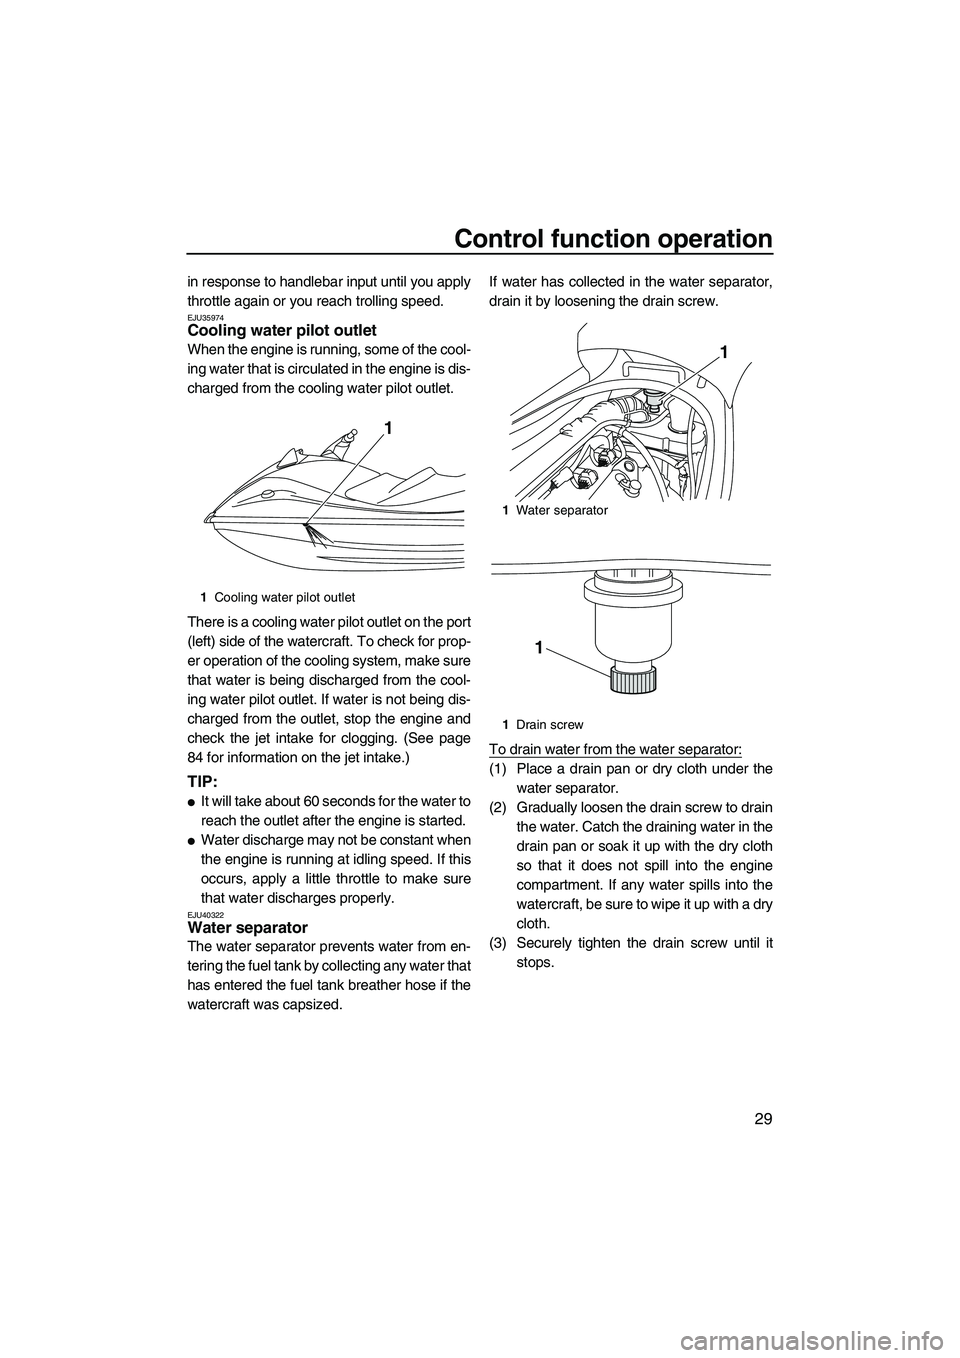 YAMAHA VX 2012  Owners Manual Control function operation
29
in response to handlebar input until you apply
throttle again or you reach trolling speed.
EJU35974Cooling water pilot outlet 
When the engine is running, some of the coo